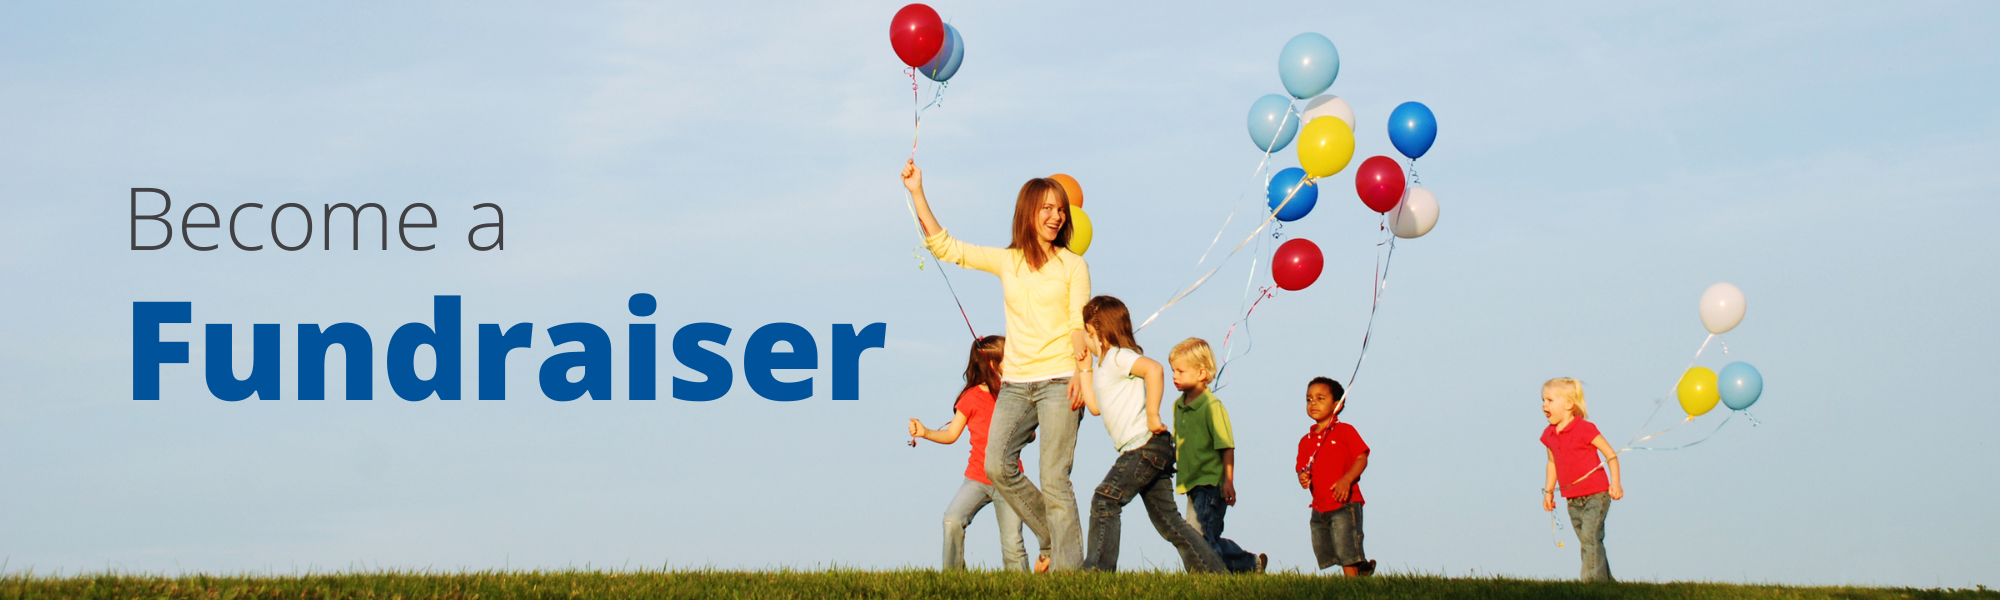 An adult leads a group of children, all hold balloons. The text overlaid on the image reads "Become a FUNDRAISER.""